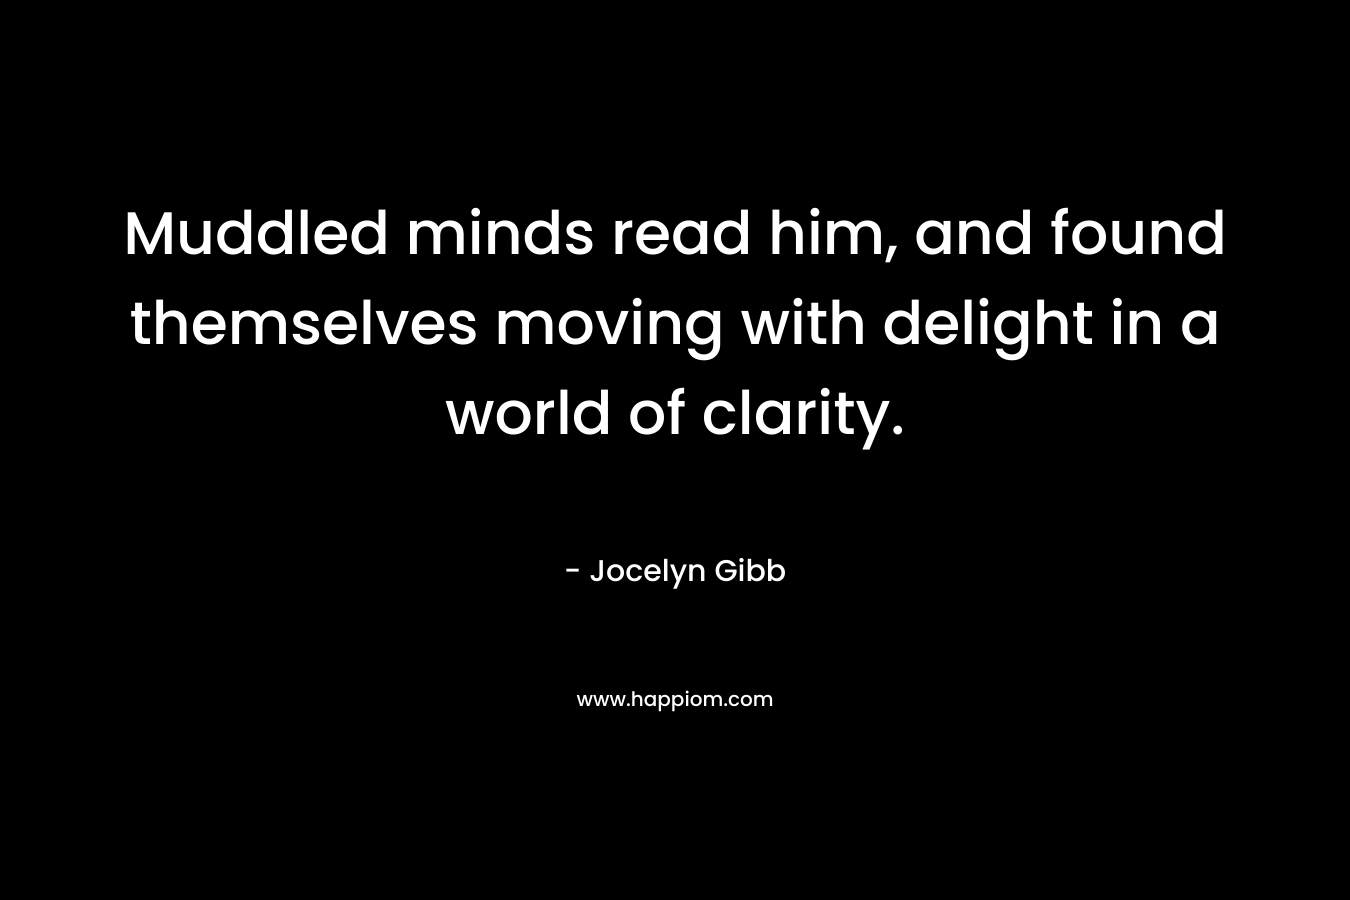 Muddled minds read him, and found themselves moving with delight in a world of clarity. – Jocelyn Gibb